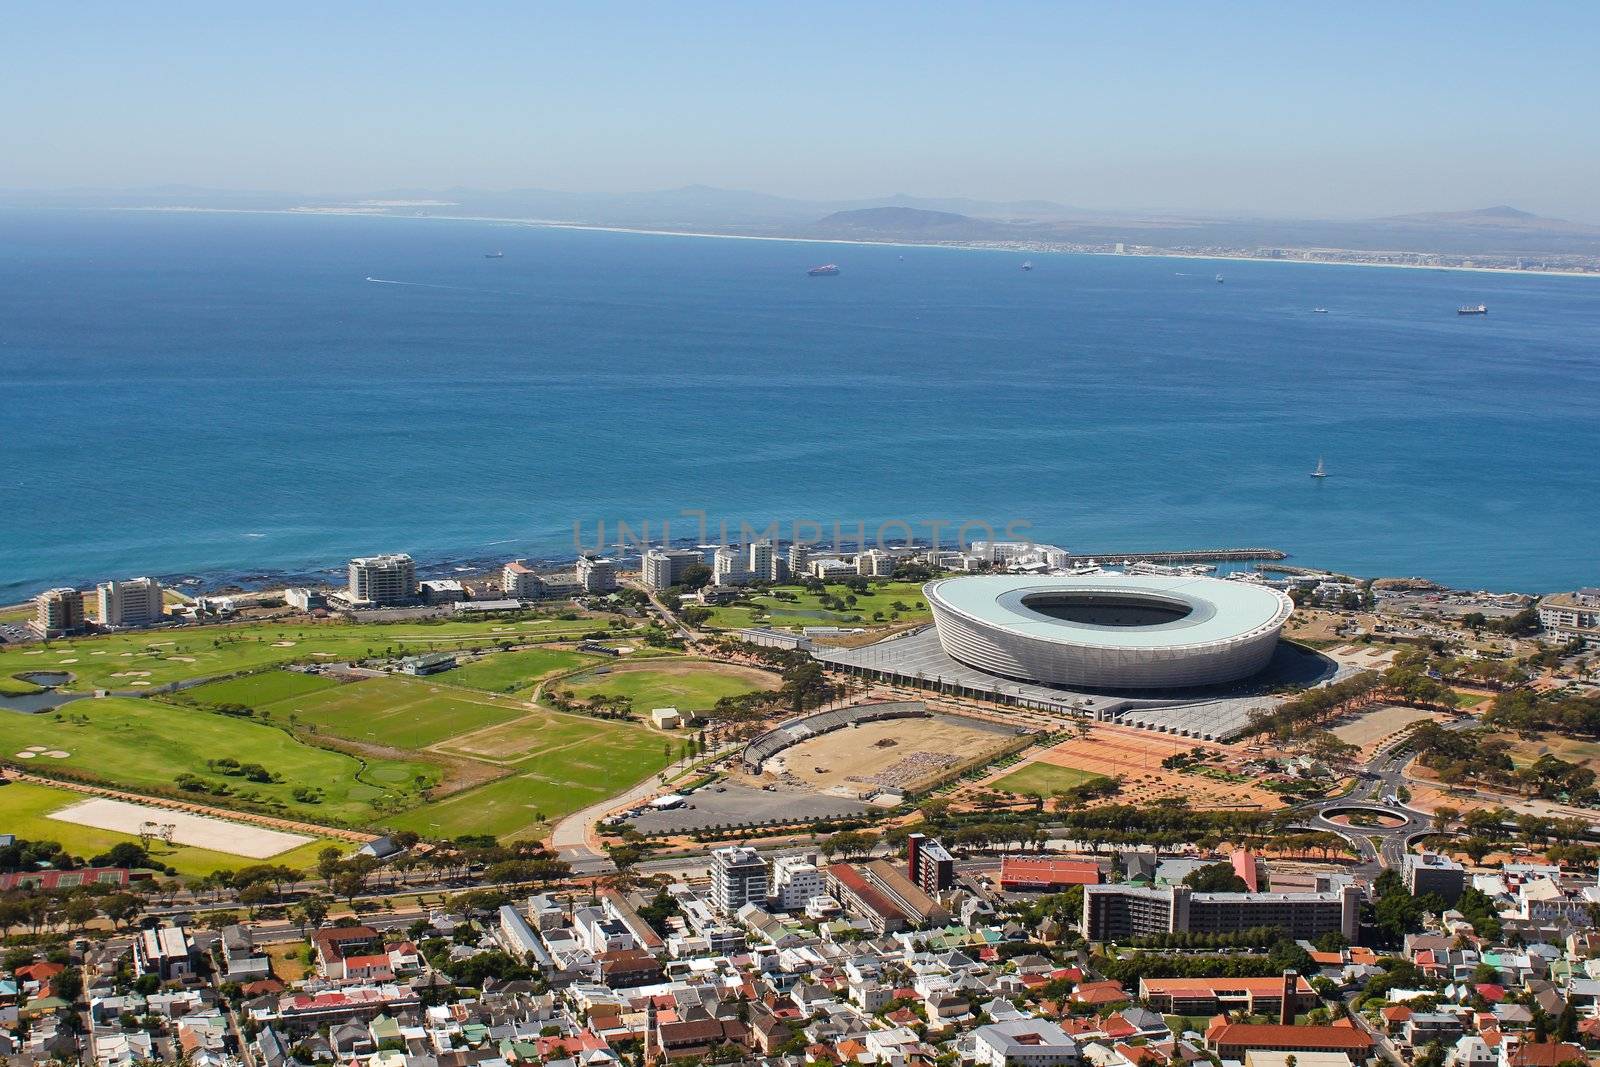 View of Mouille Point with the cape town Stadium from Signal Hill